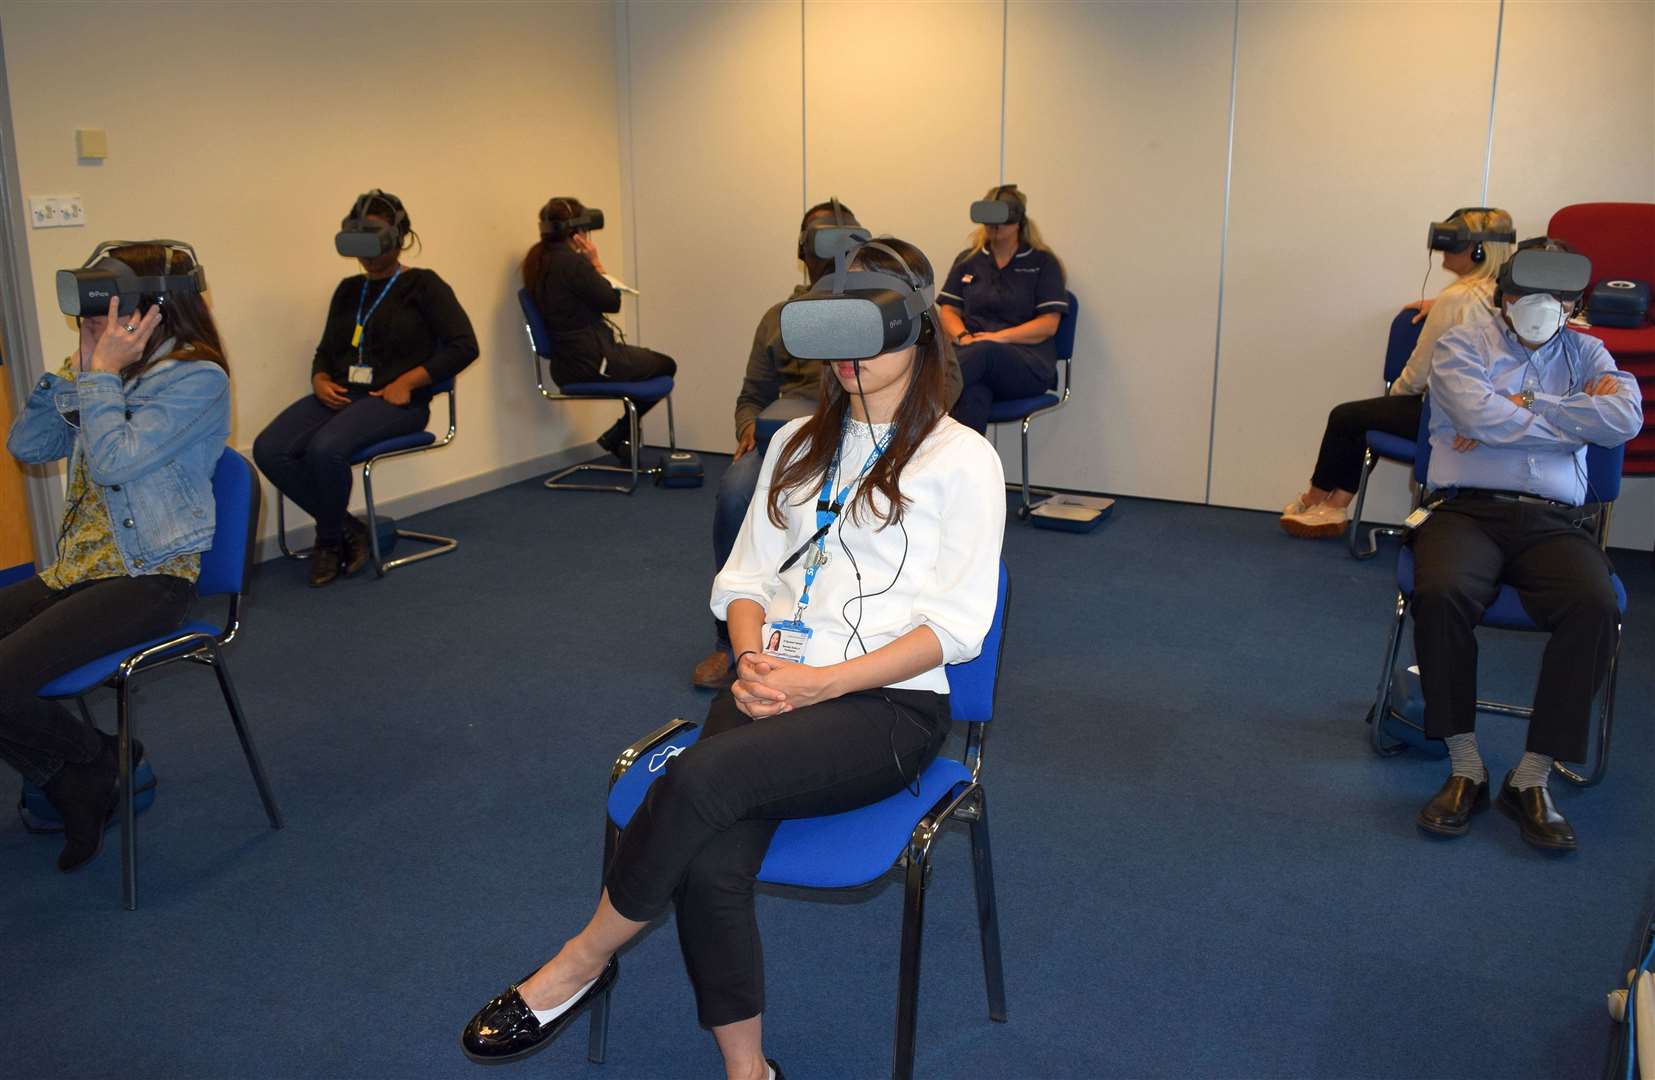 Darent Valley Hospital in Dartford is using virtual reality in its safeguarding training